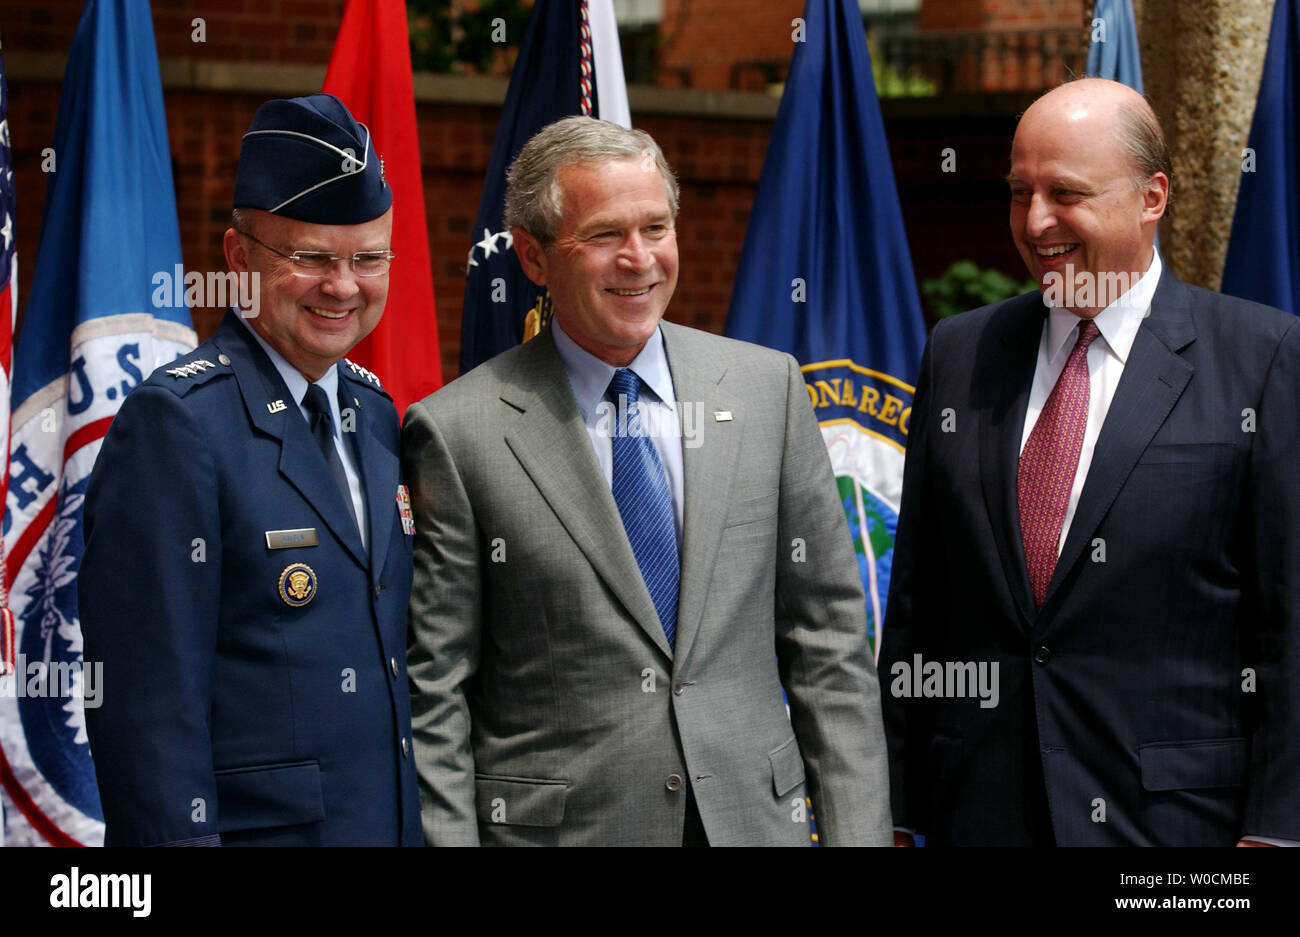 U.S. President George W. Bush jokes with U.S. Deputy Director of National Intelligence, U.S. Air Force Lt Gen. Michael Hayden, left, and the first Director of National Intelligence, John Negroponte, right, after a ceremony to swear both into their new jobs on May 18, 2005 in Washington.  The new positions will coordinate national and international intelligence in a way deemed necessary after the attacks on 9/11. (UPI Photo/Michael Kleinfeld) Stock Photo